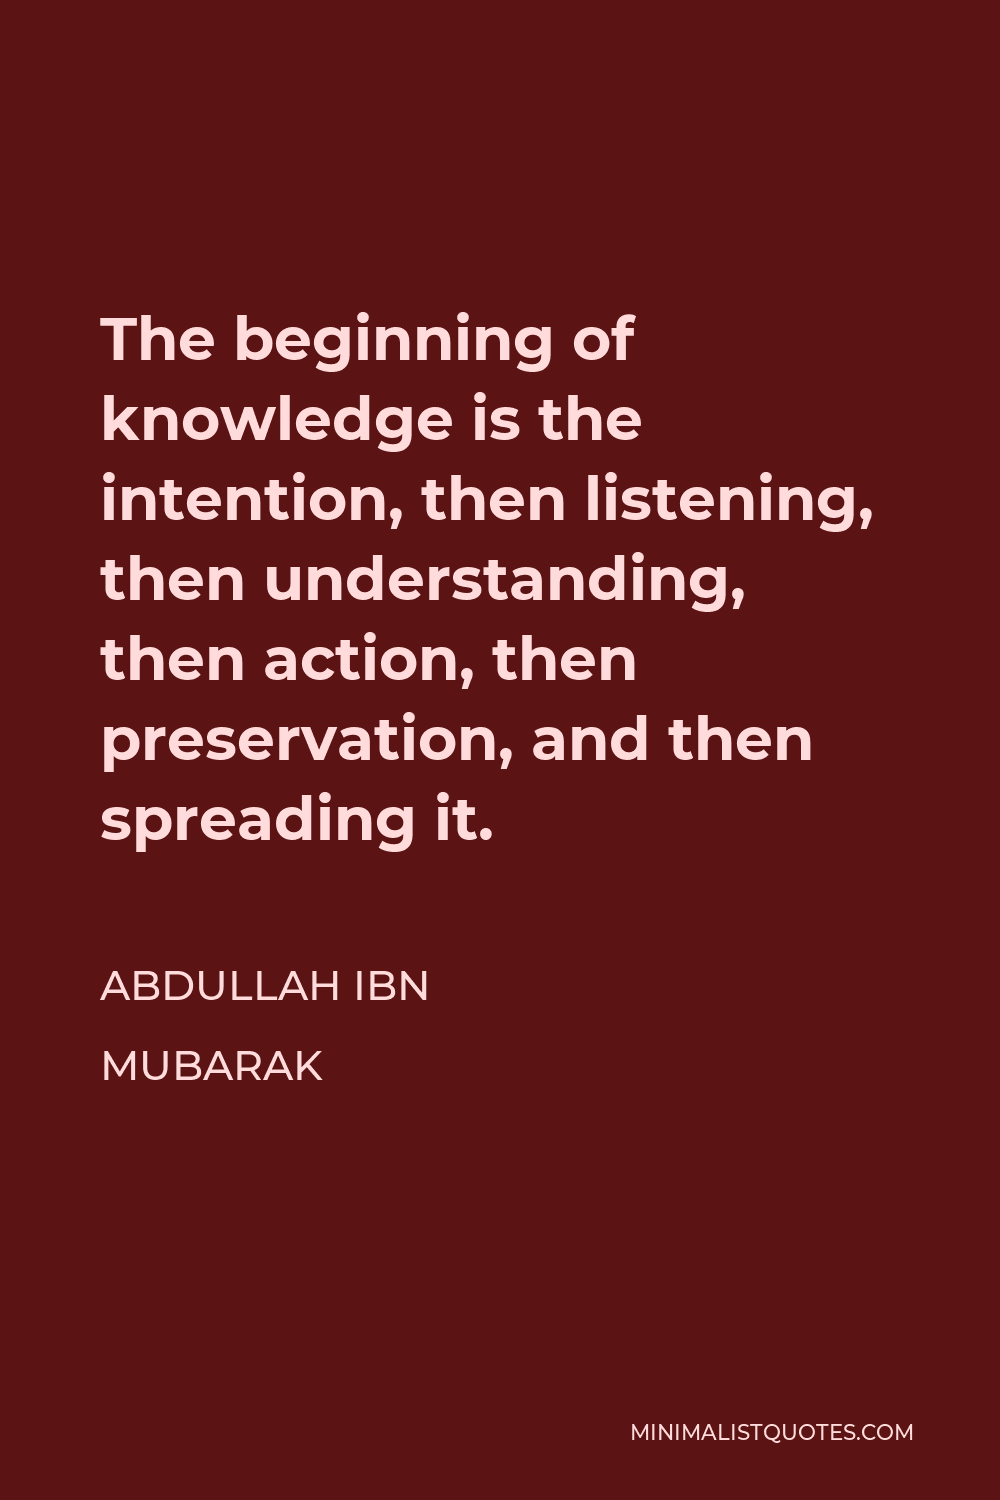 Abdullah ibn Mubarak Quote - The beginning of knowledge is the intention, then listening, then understanding, then action, then preservation, and then spreading it.